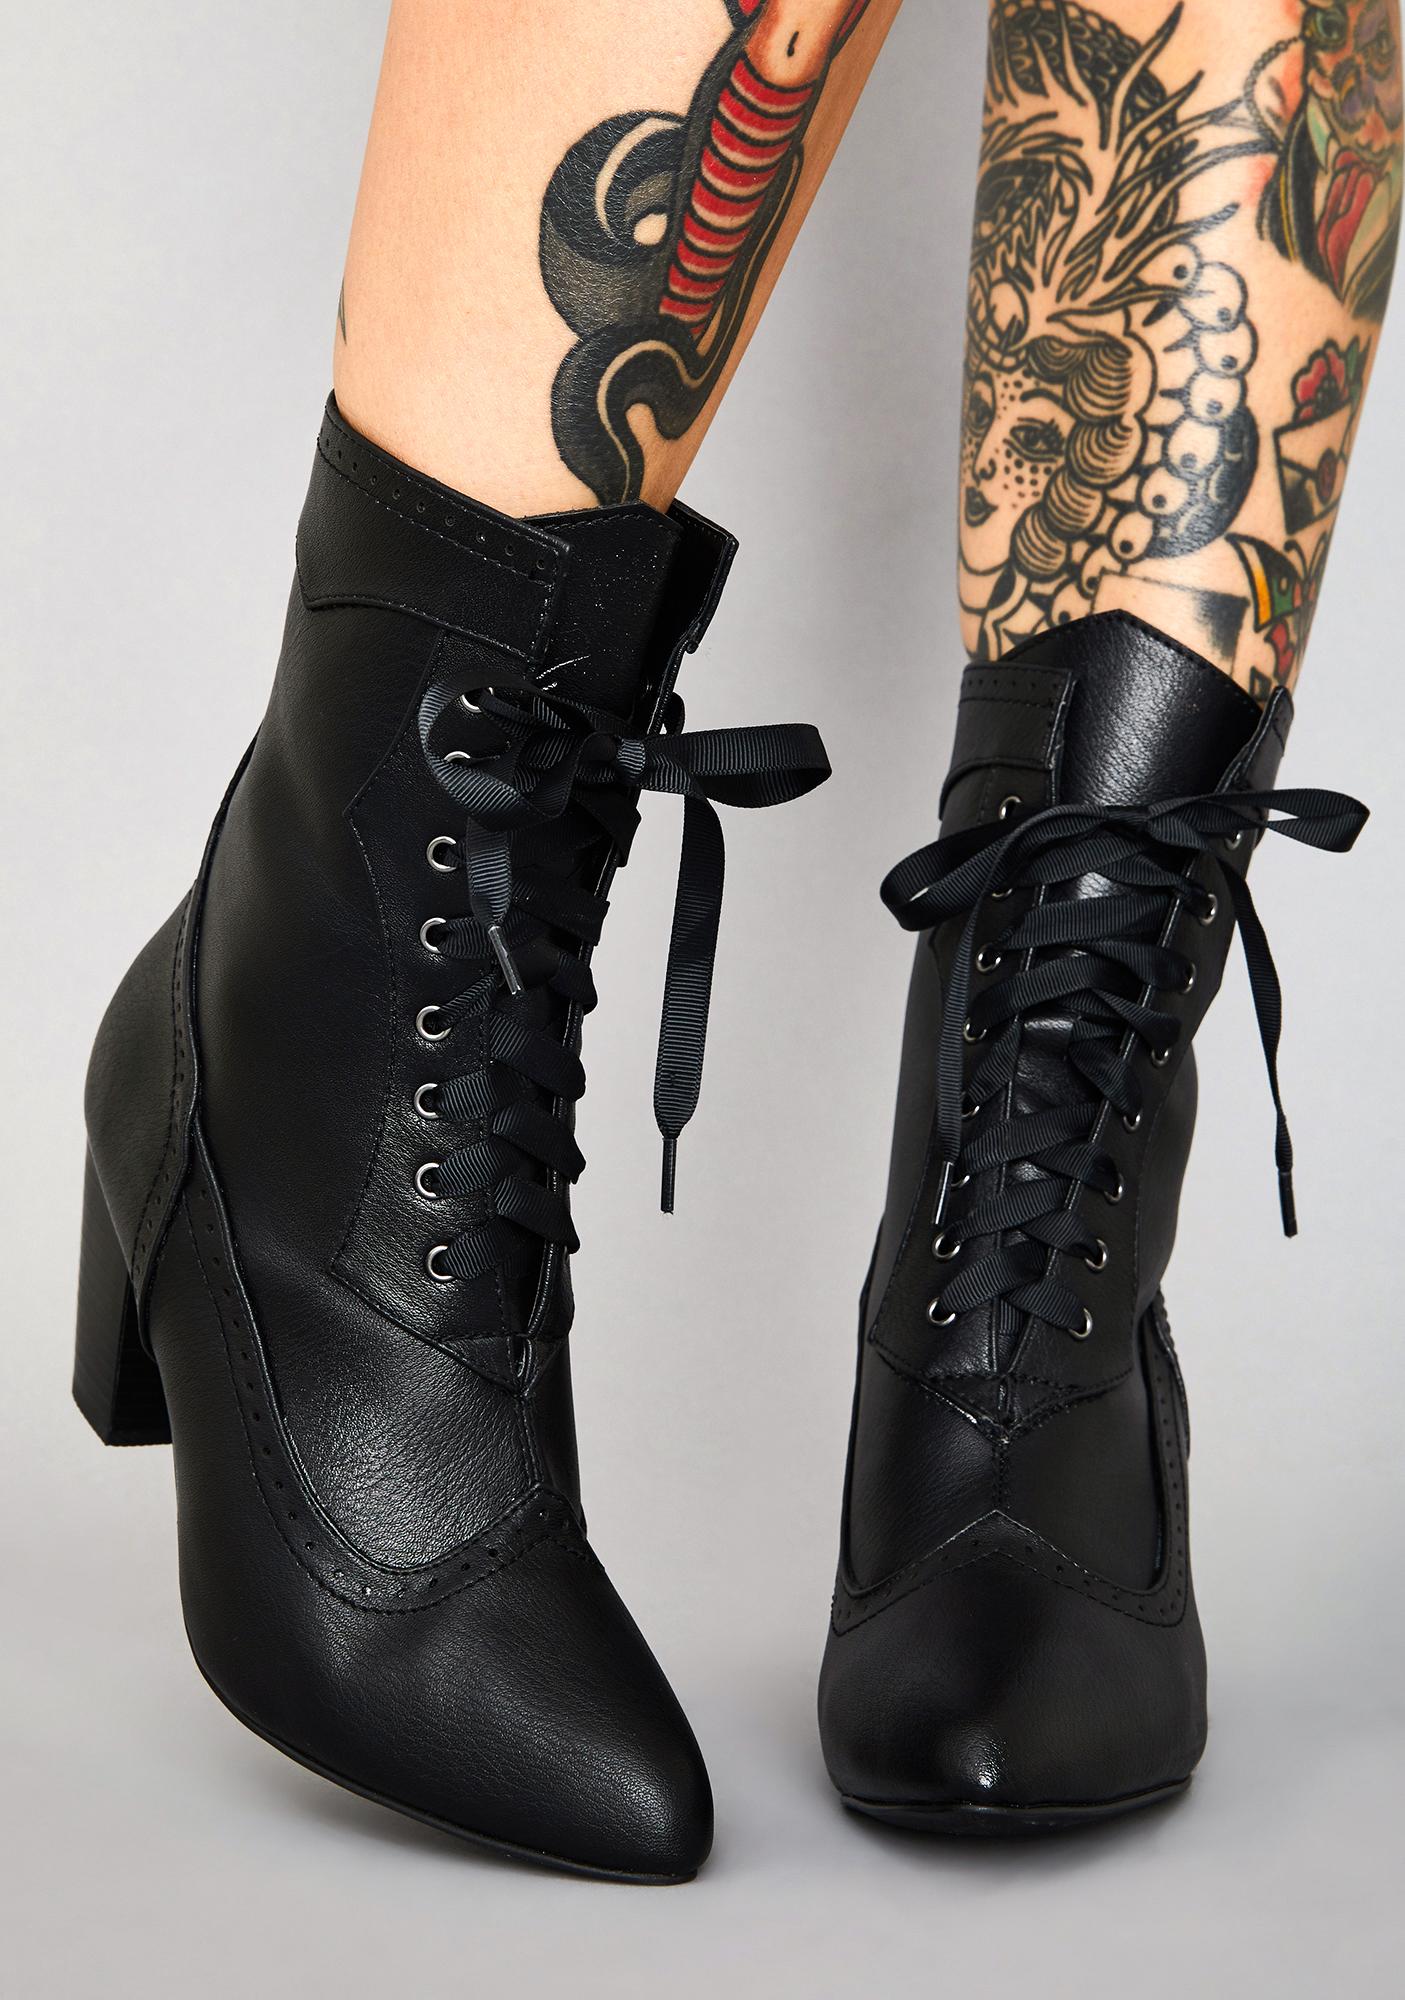 Widow Victorian Heel Boots Lace Up 